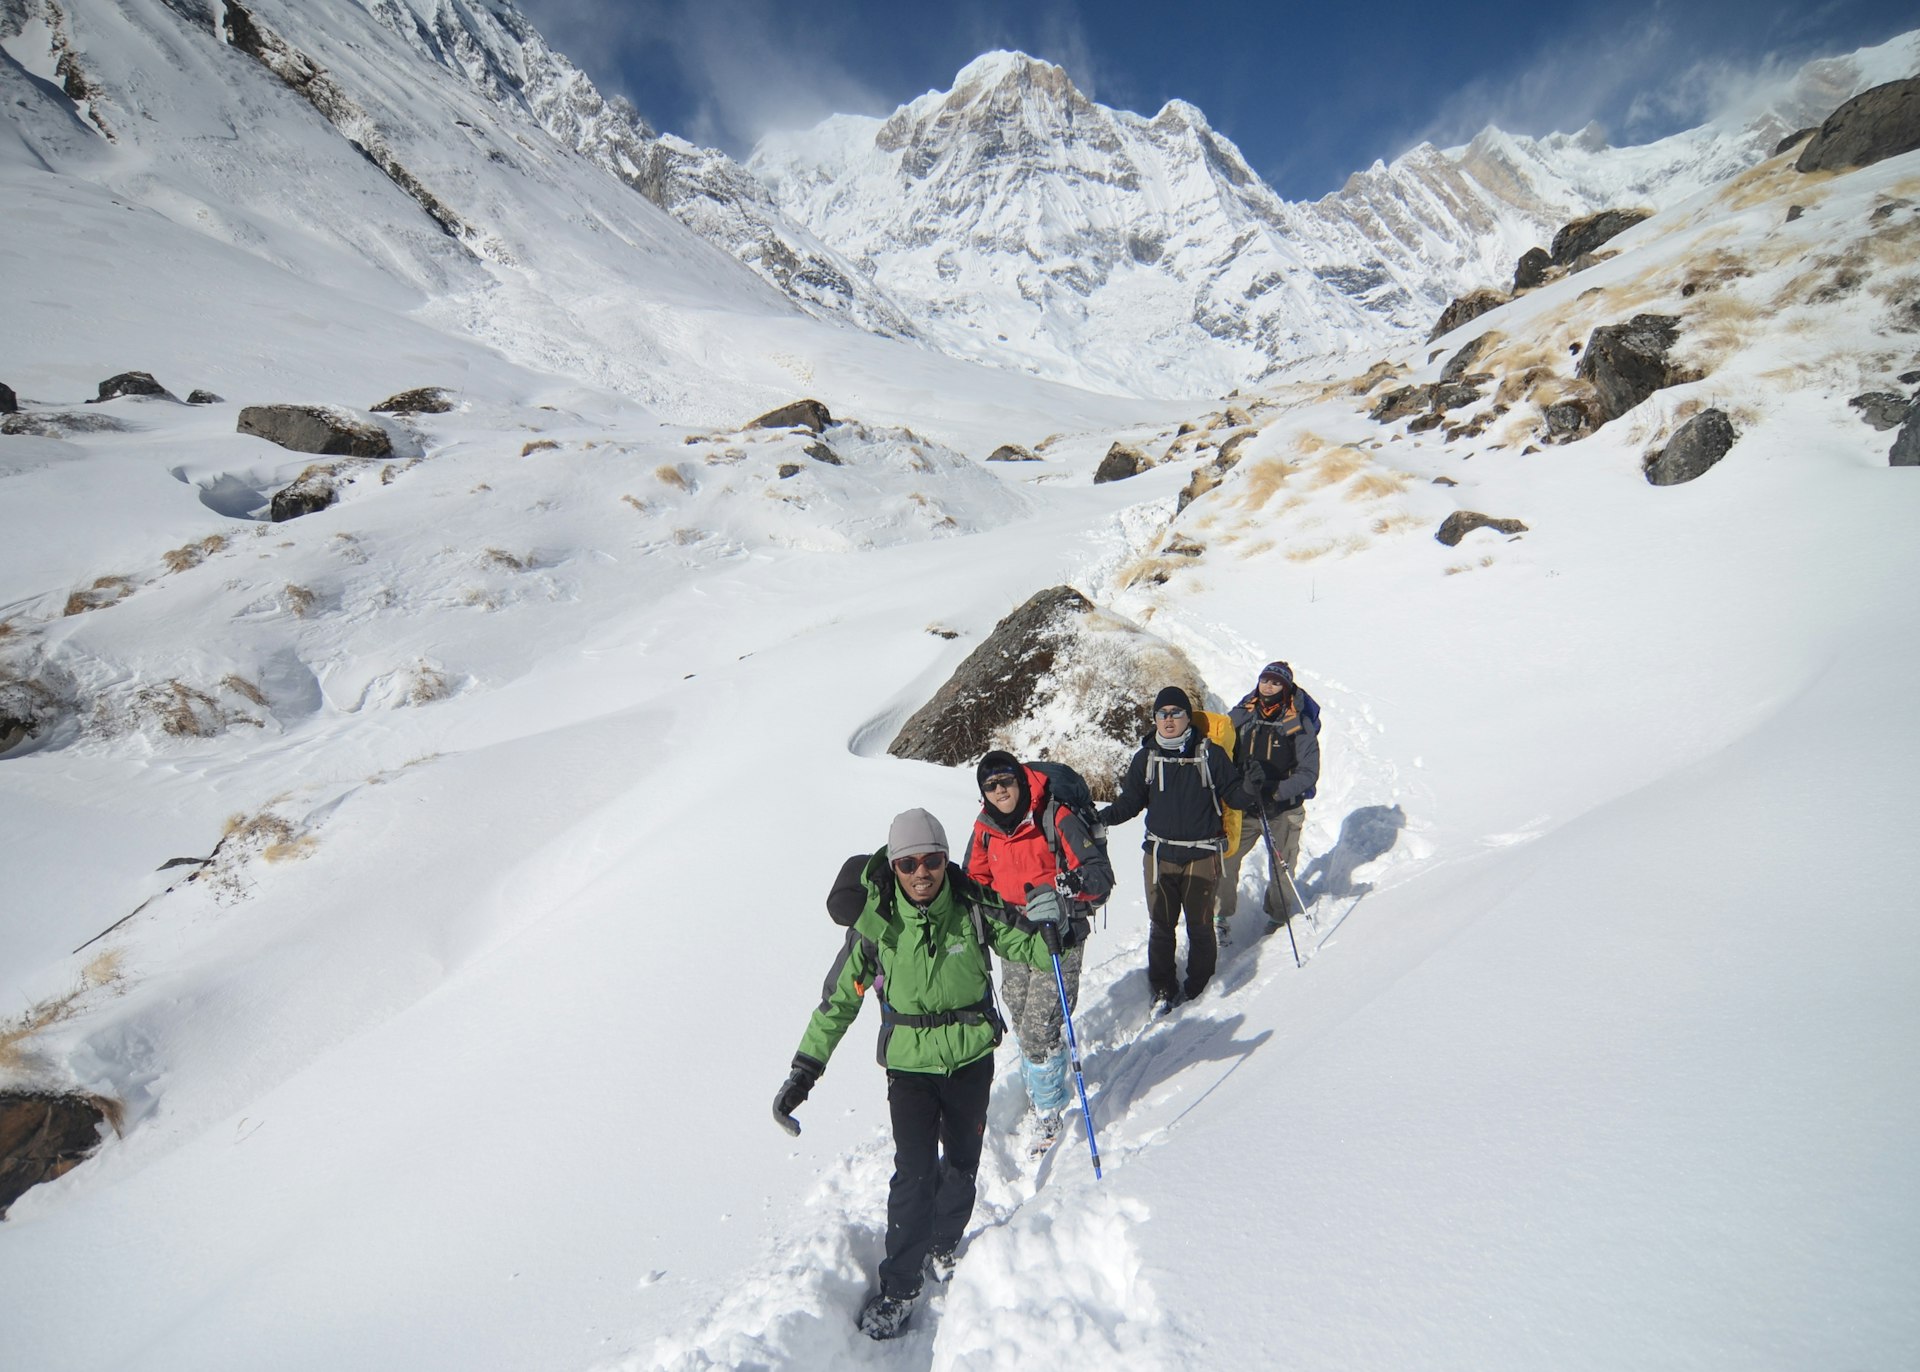 Arriving at Annapurna Base Camp in the snow. Image by udayismail / CC BY-SA 2.0.